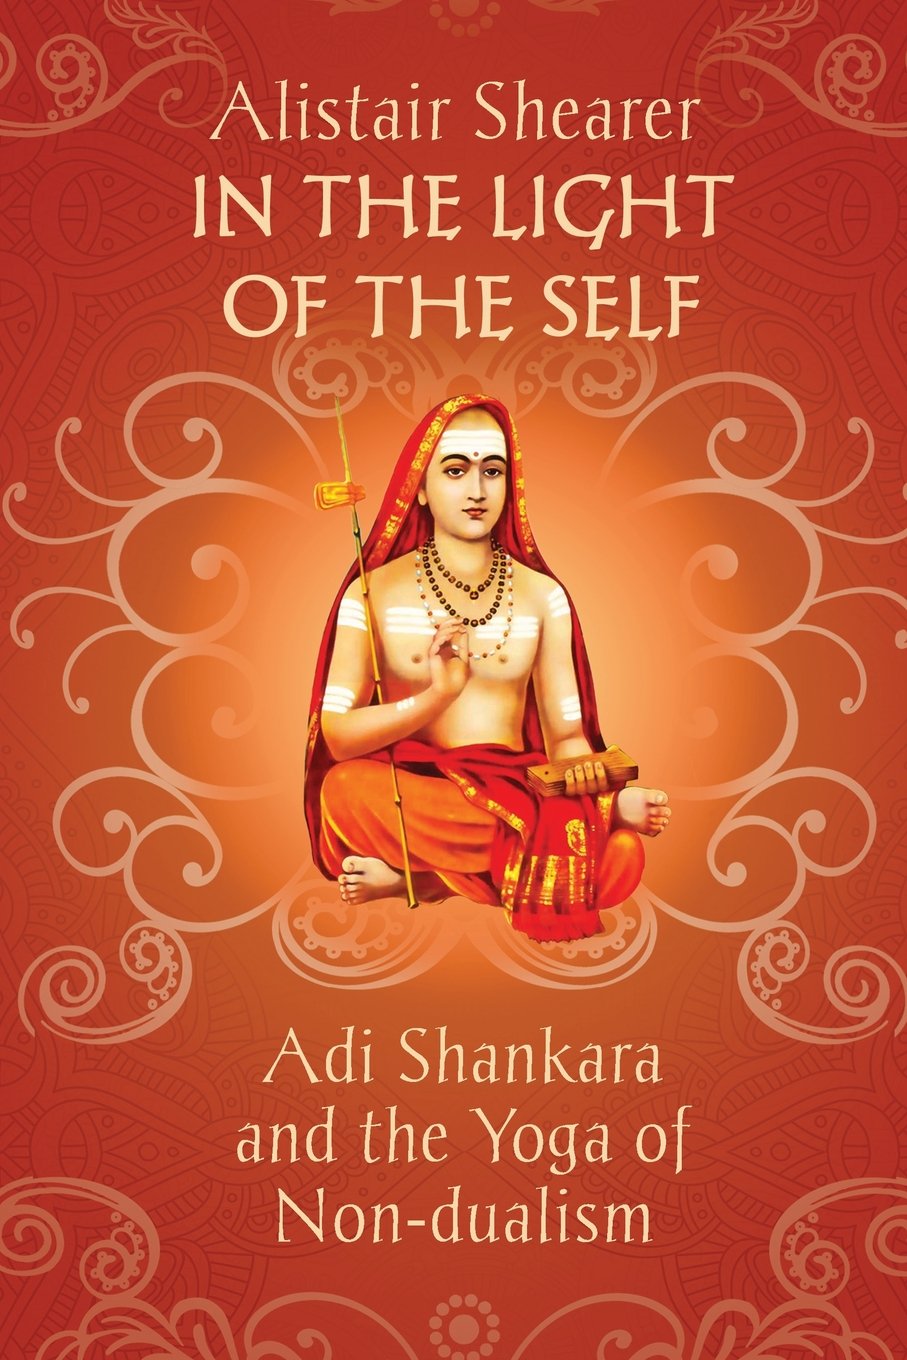 In the Light of the Self: Adi Shankara and the Yoga of Non-dualism